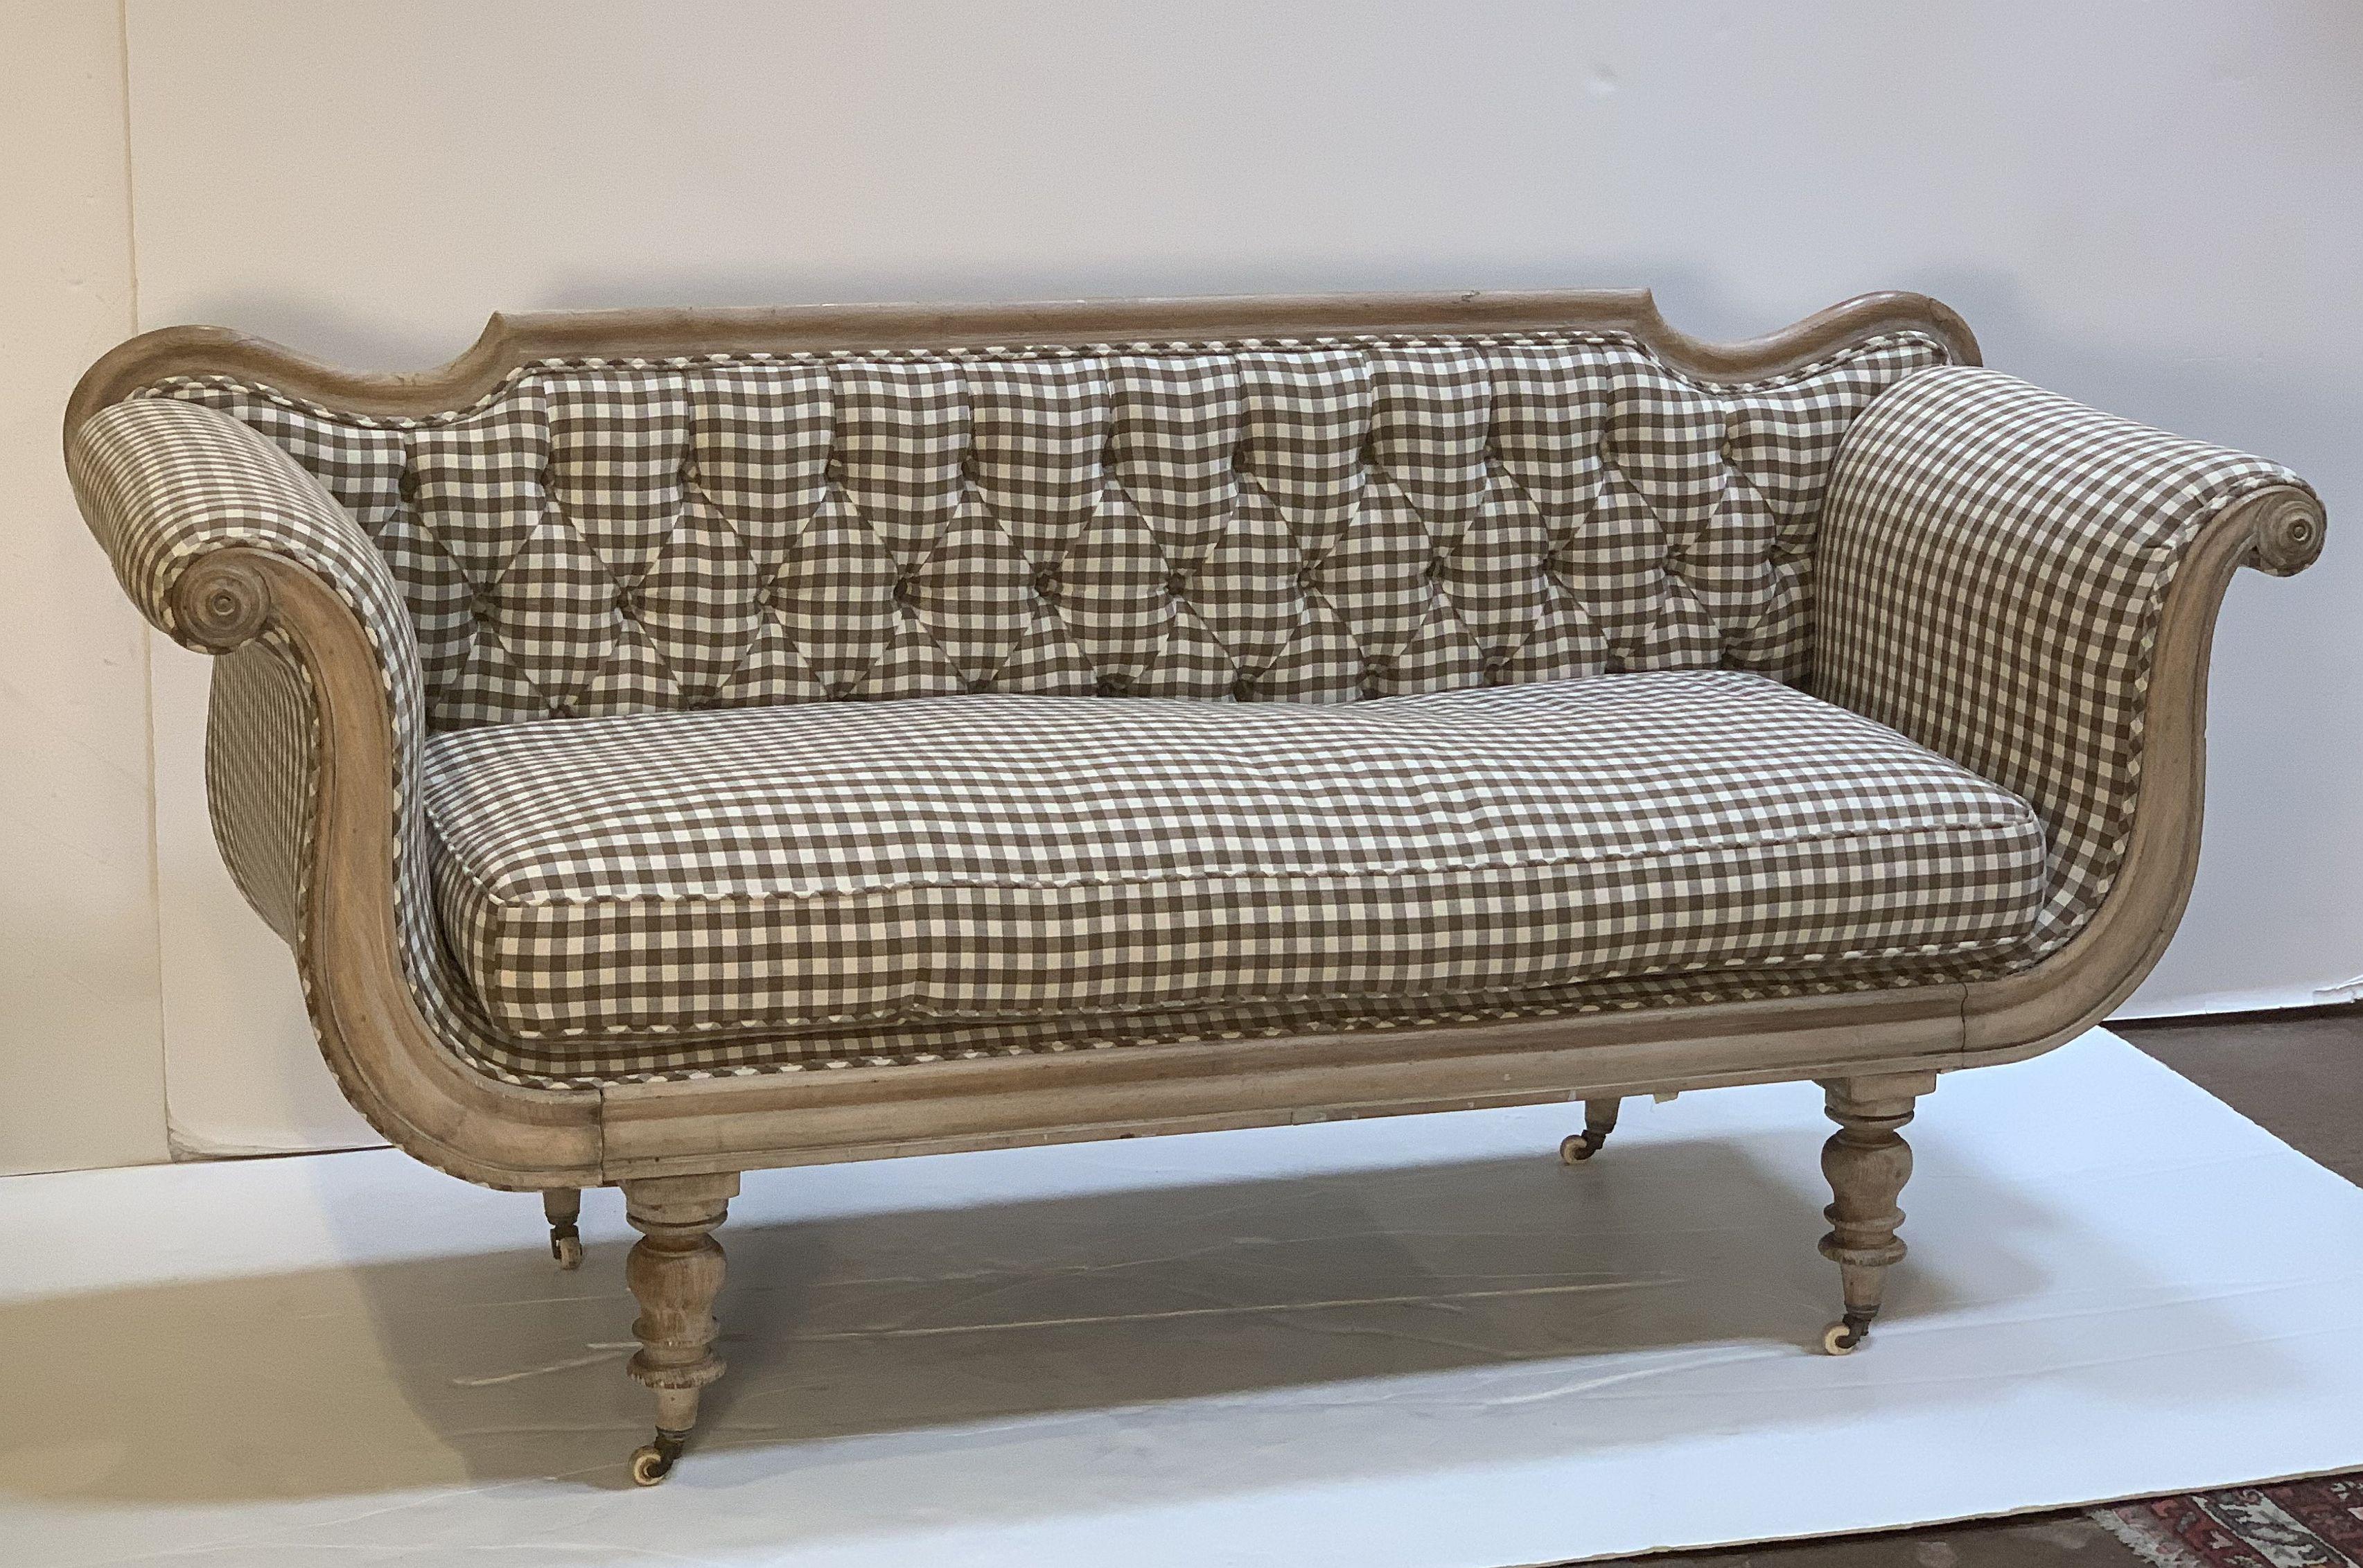 A fine, comfortable Swedish sofa from the Regency Period, featuring a serpentine lyre-shaped profile with newly-upholstered button-tufted back, scrolling arms, a fitted seat cushion, and resting on turned legs with casters.

  